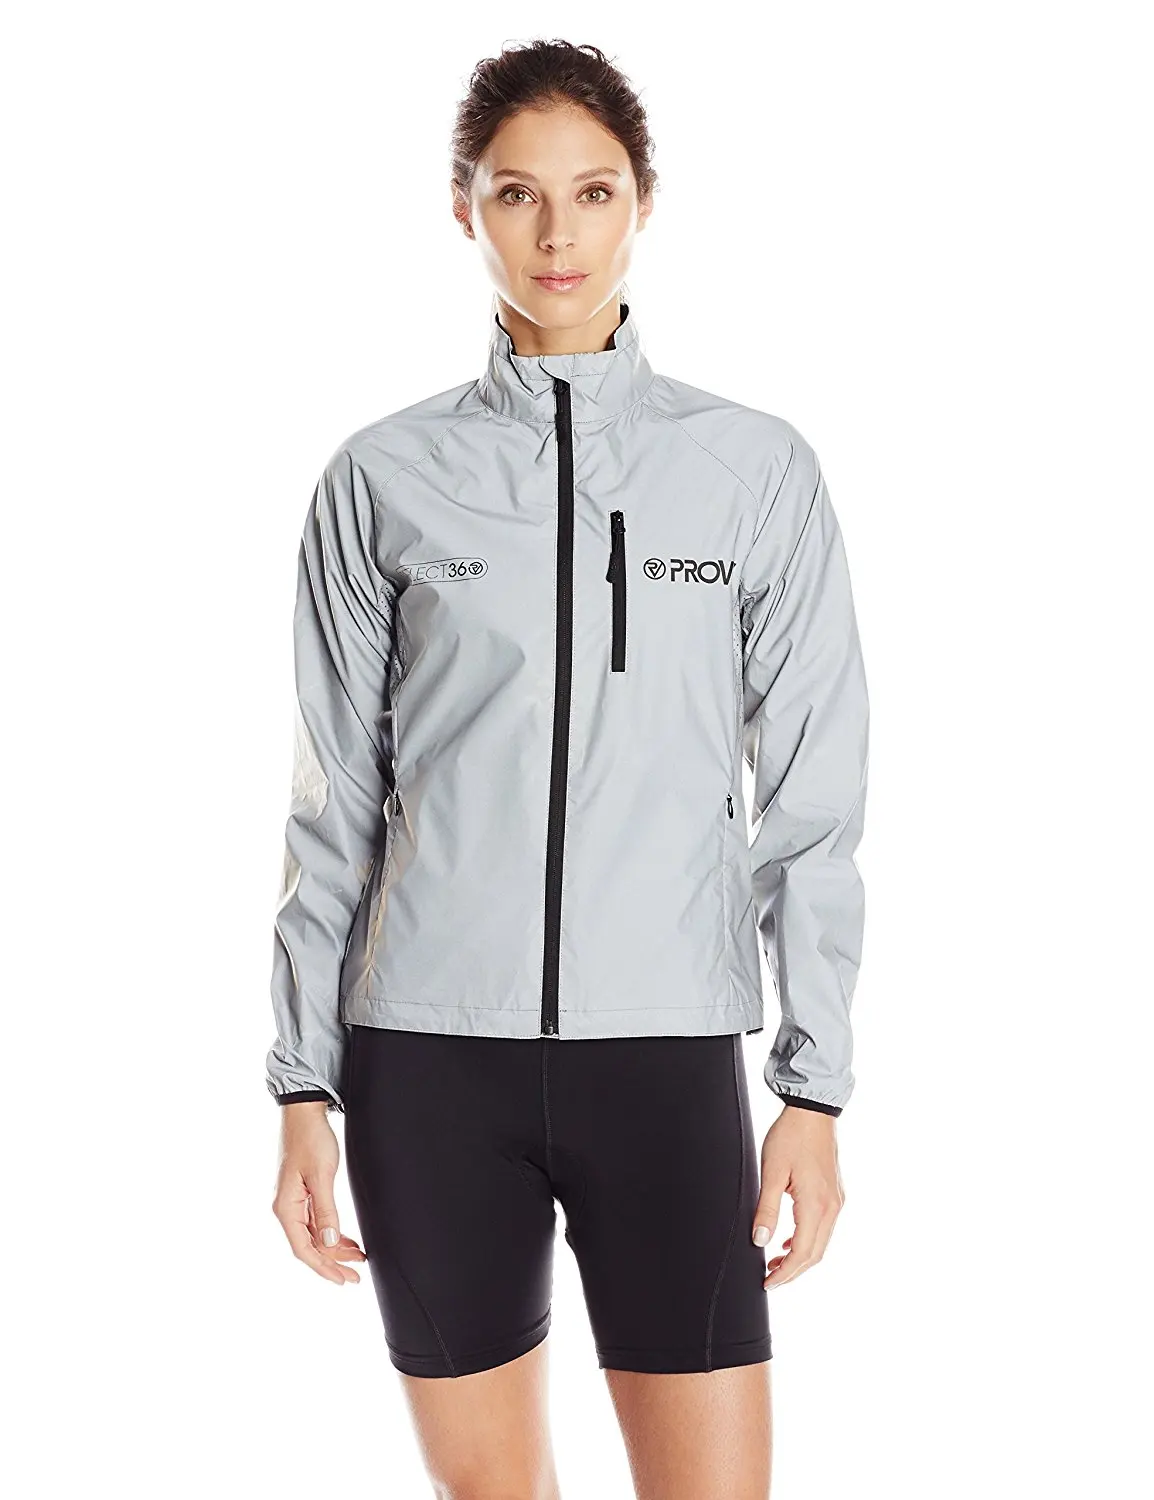 Cheap Womens Reflective Jacket, find Womens Reflective Jacket deals on ...